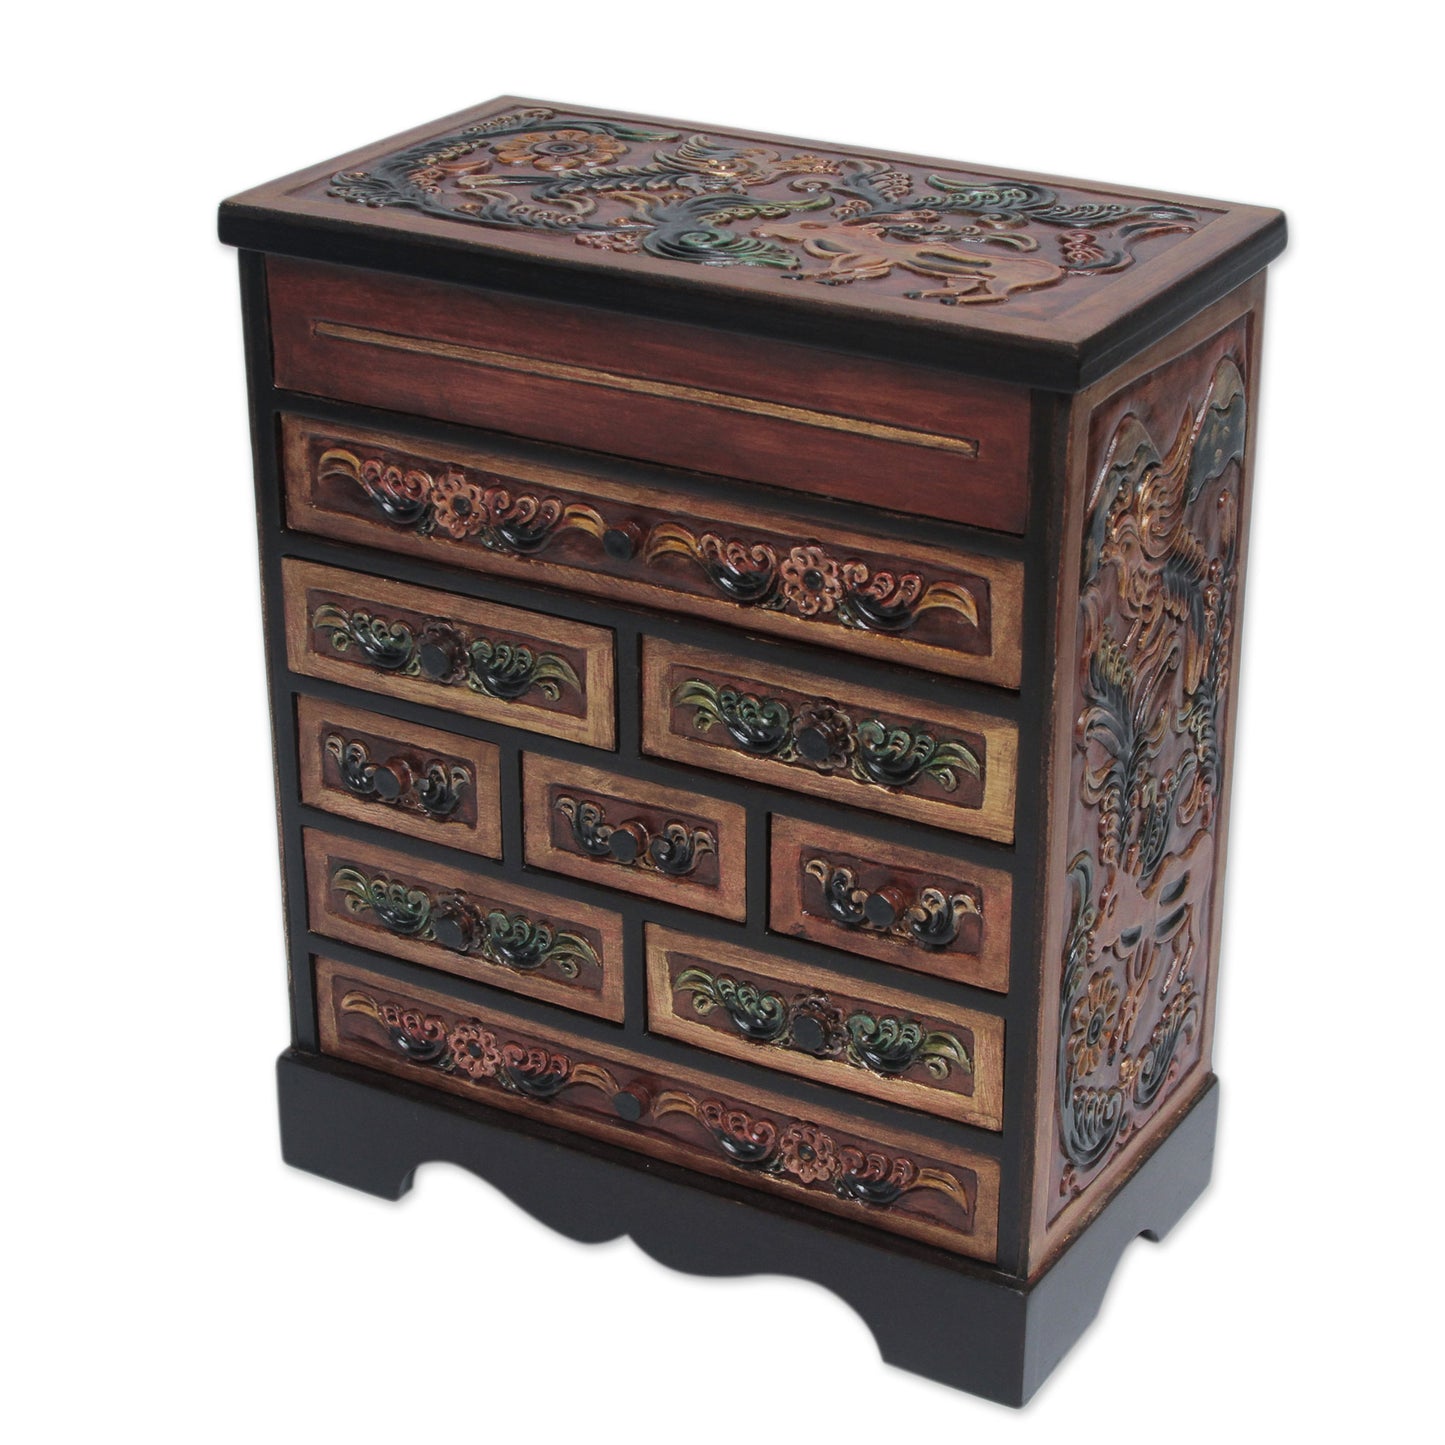 Nature's Glory Flora and Fauna Cedar and Leather Jewelry Box with Drawers